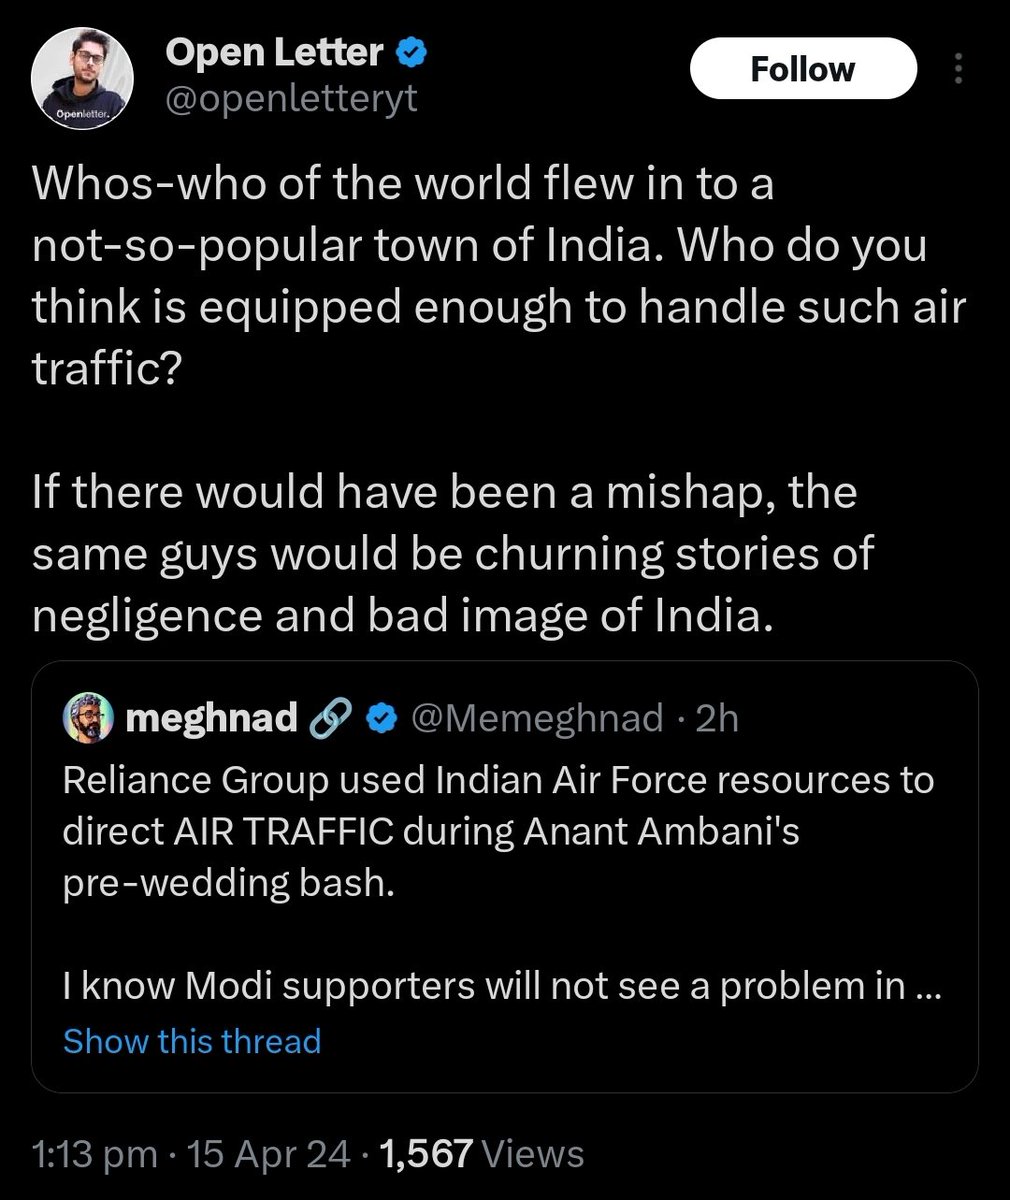 Ambani defenders have arrived. My tweet was in favor of the IAF, calling out their misuse for a pre-wedding event. And this one is batting for Ambani's right to hold extravagant weddings. 😂 Such responses just show you the real face of these pseudo country loving bhaktards.